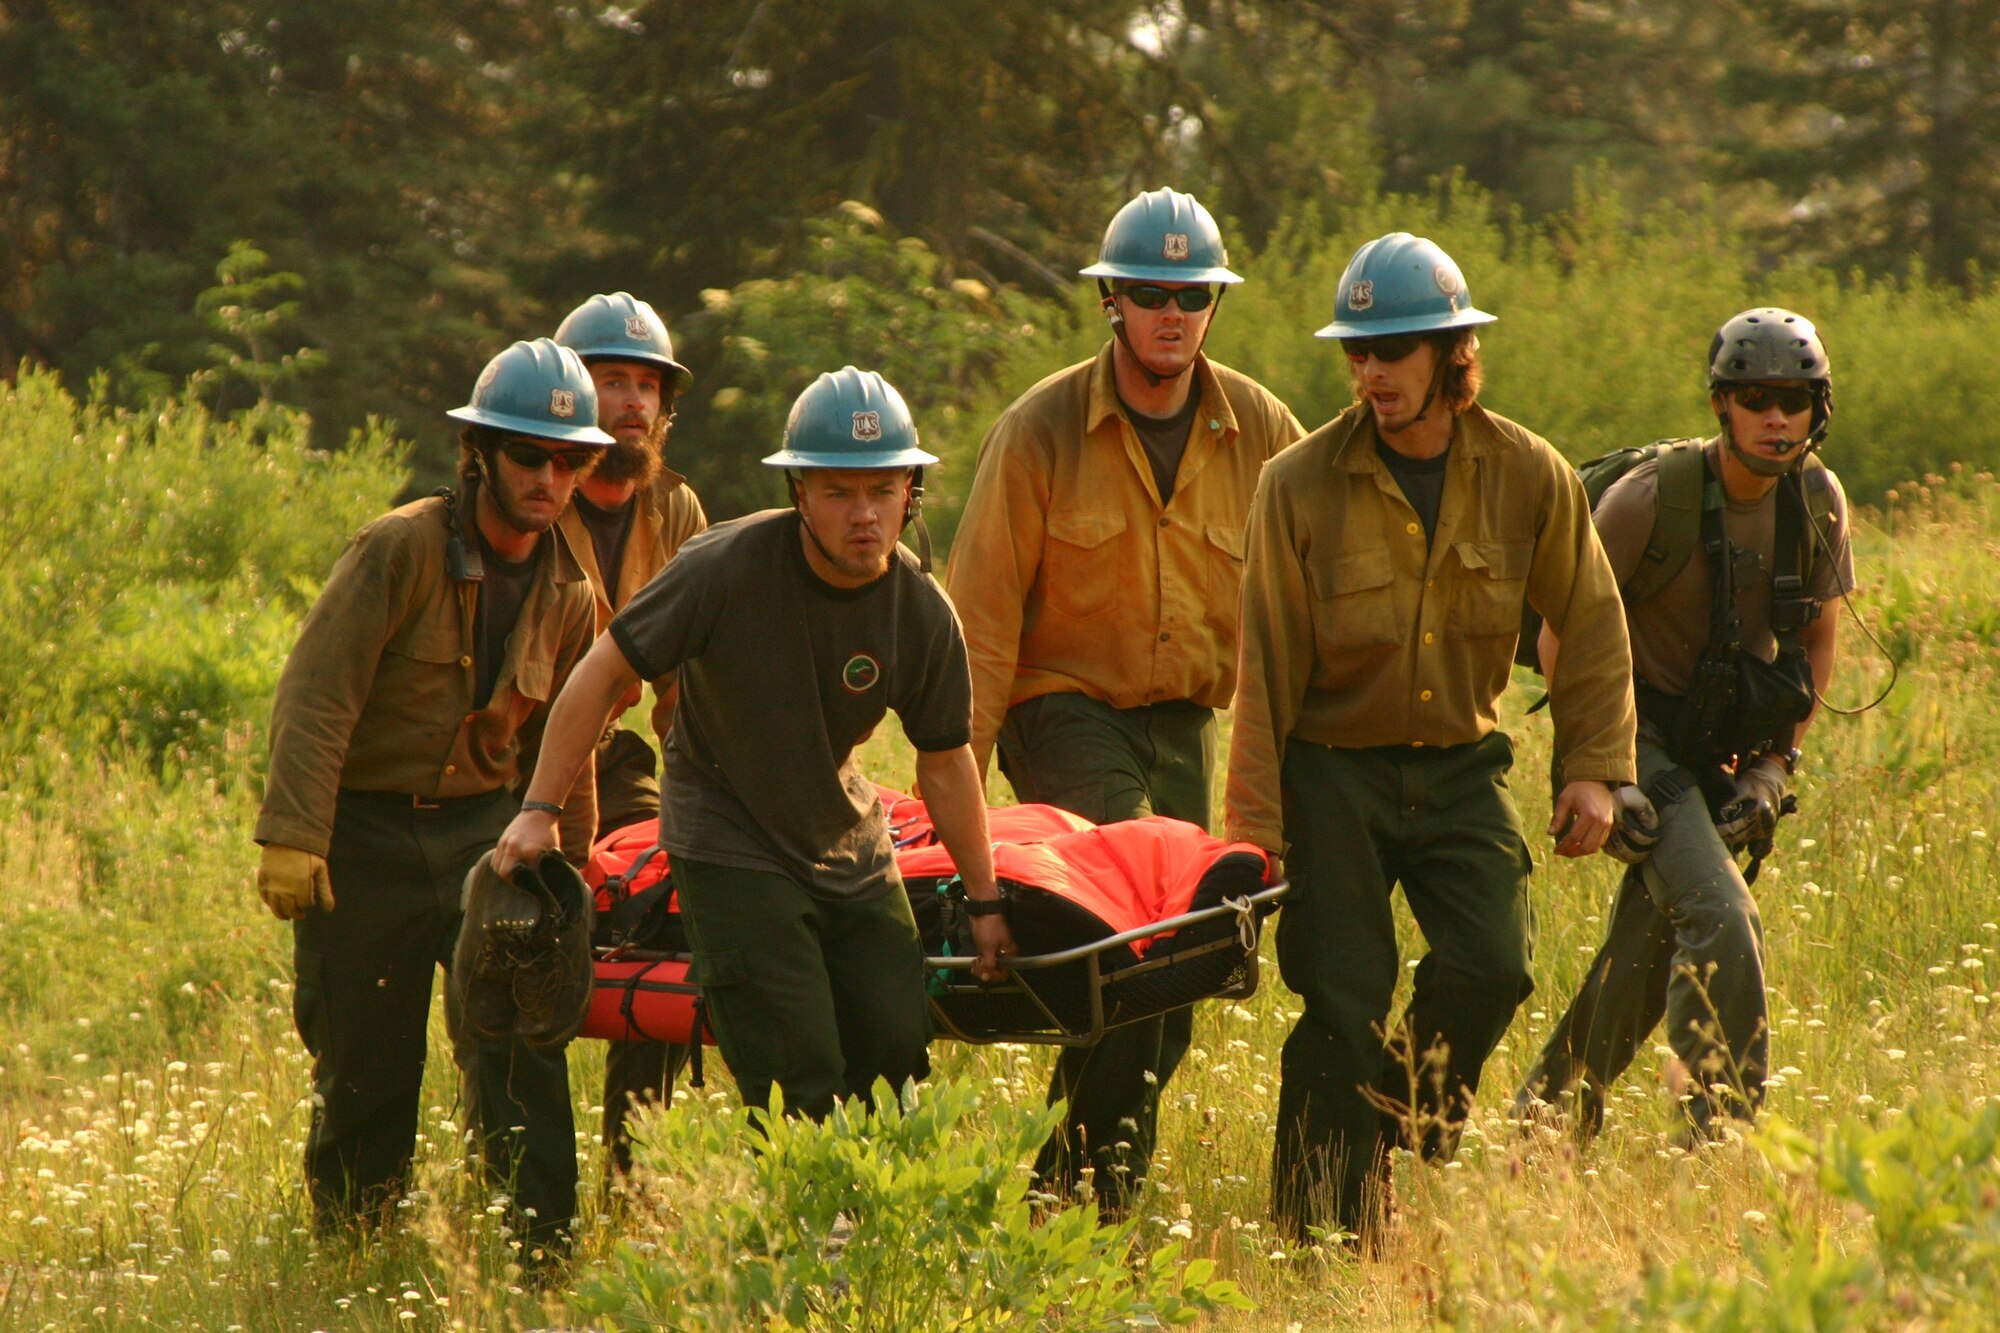 Staff Sgt. Darren Pon (right), pararescueman from the 131st Rescue Squadron, accompanies a Shasta, California-based firefighting crew carrying an injured firefighter to an awaiting HH-60G Pave Hawk northwest of Redding, Calif., July 31. While battling the Iron Complex Wildland Fire, the firefighter fell and suffered a concussion. The 129th Rescue Wing aircrew and pararescuemen landed in rugged terrain at approximately 6,000 feet to rescue the firefighter, and subsequently medevaced him to Mercy Medical Center in Redding. (U.S. Air Force photo by Tech. Sgt. Brock Woodward)